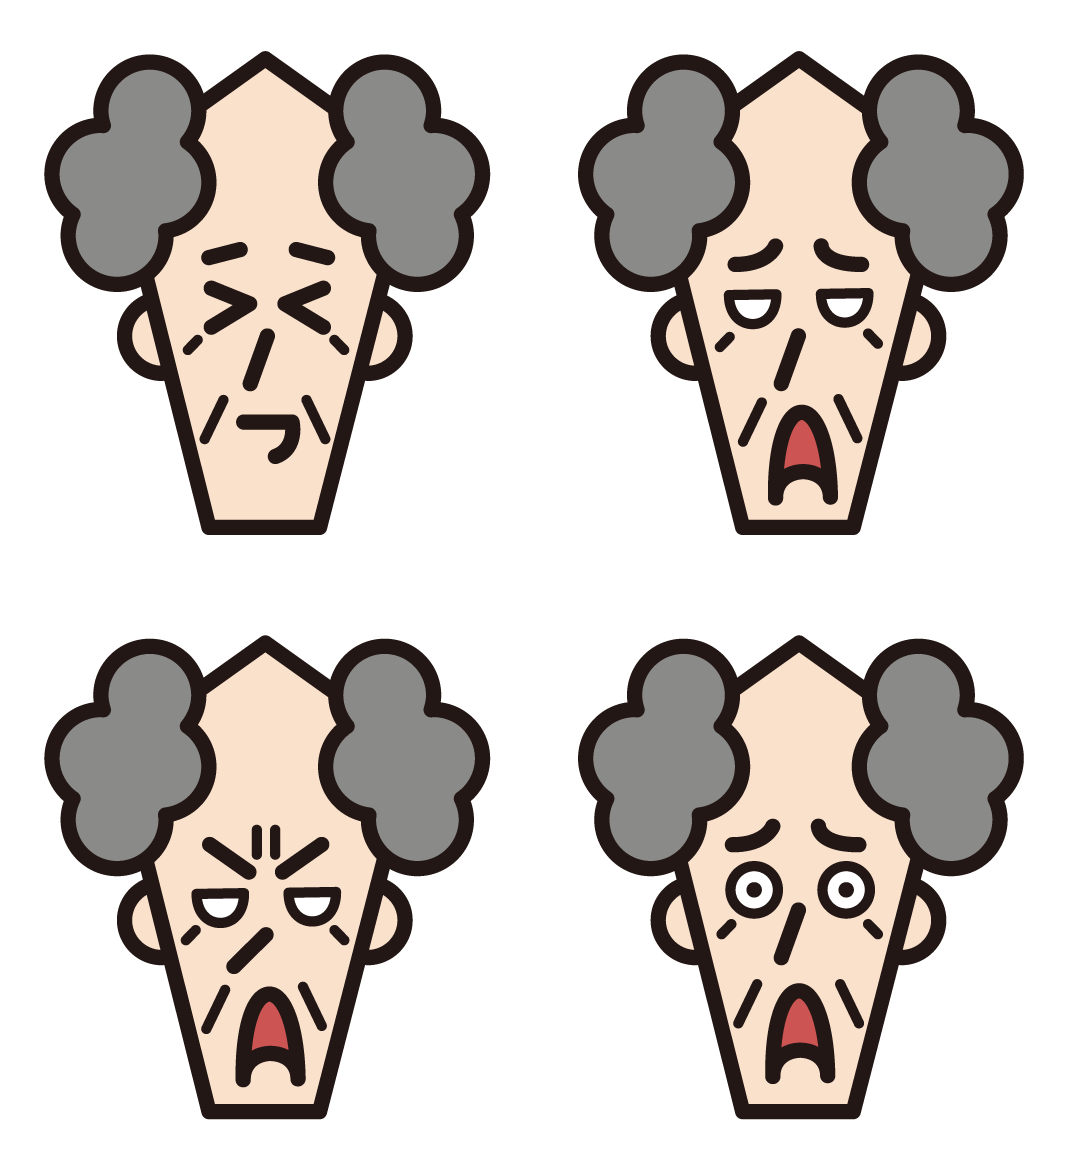 Illustration of the grandfather's various facial expressions (disheveled hairstyle) 1